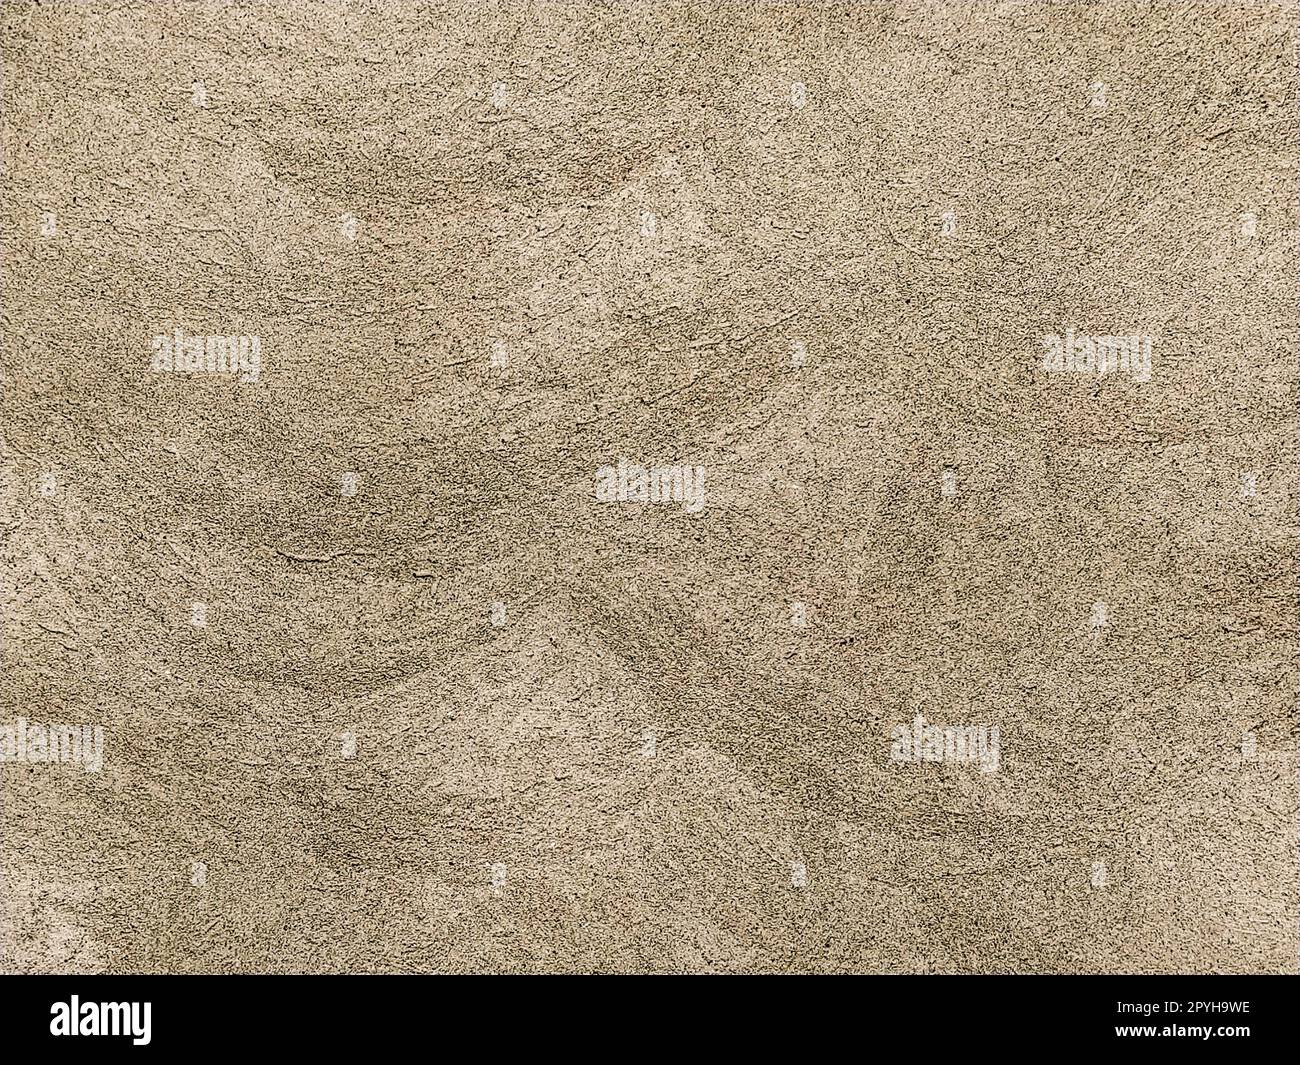 Concrete surface with multi-colored blotches of small stones. Light beige tone. Wall of a building or concrete slab. Close-up. Pockmarked cement surface. Interior or exterior finish option Stock Photo